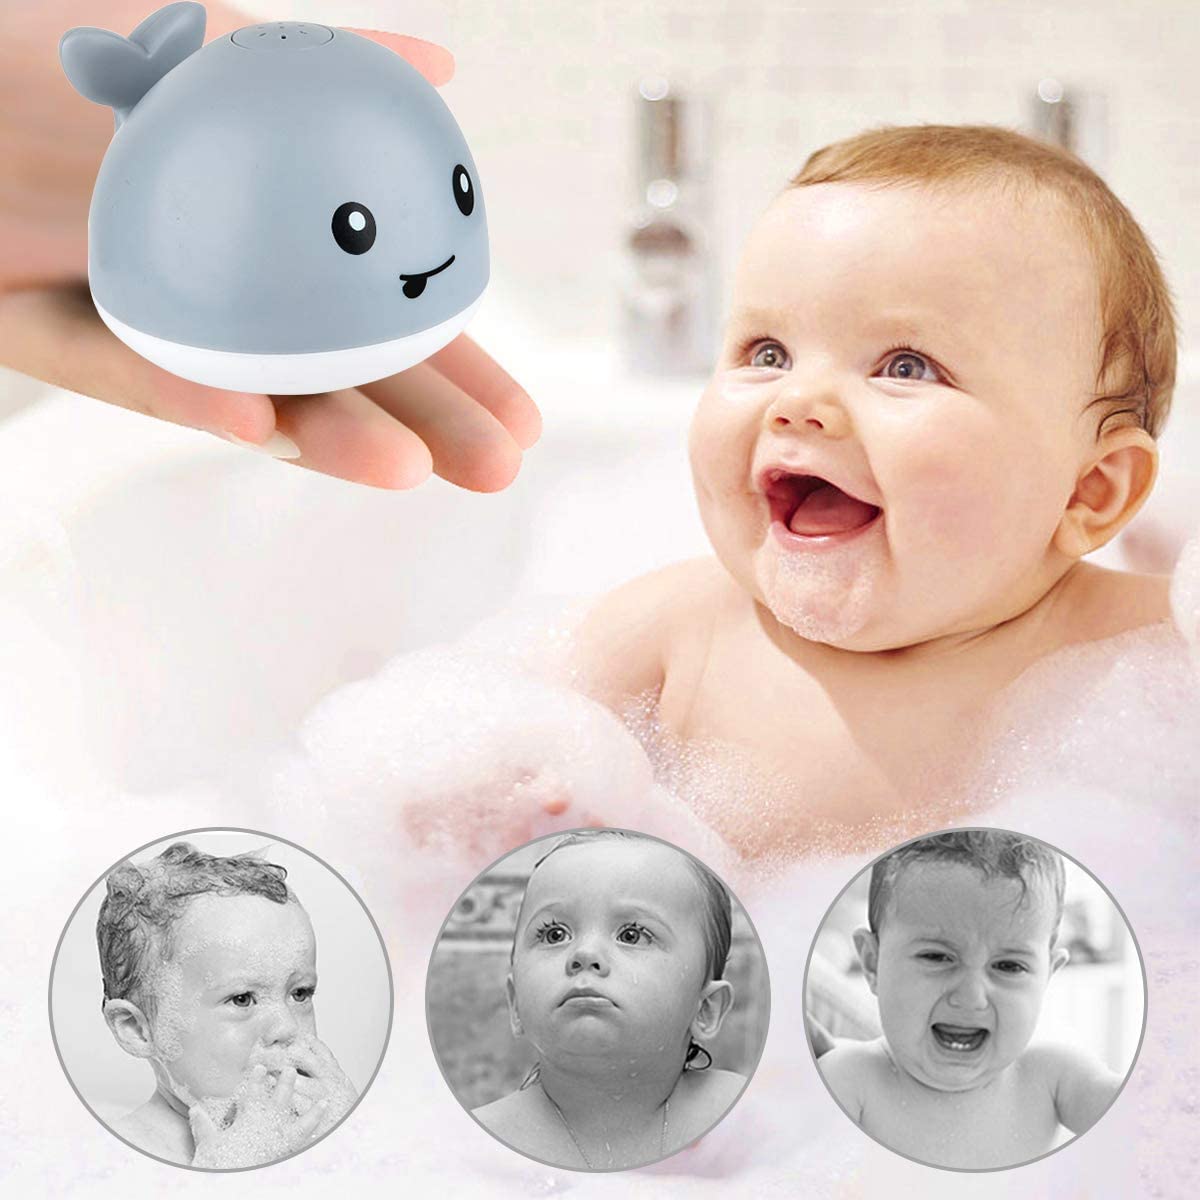 Whale bath toy makes baby love bathing